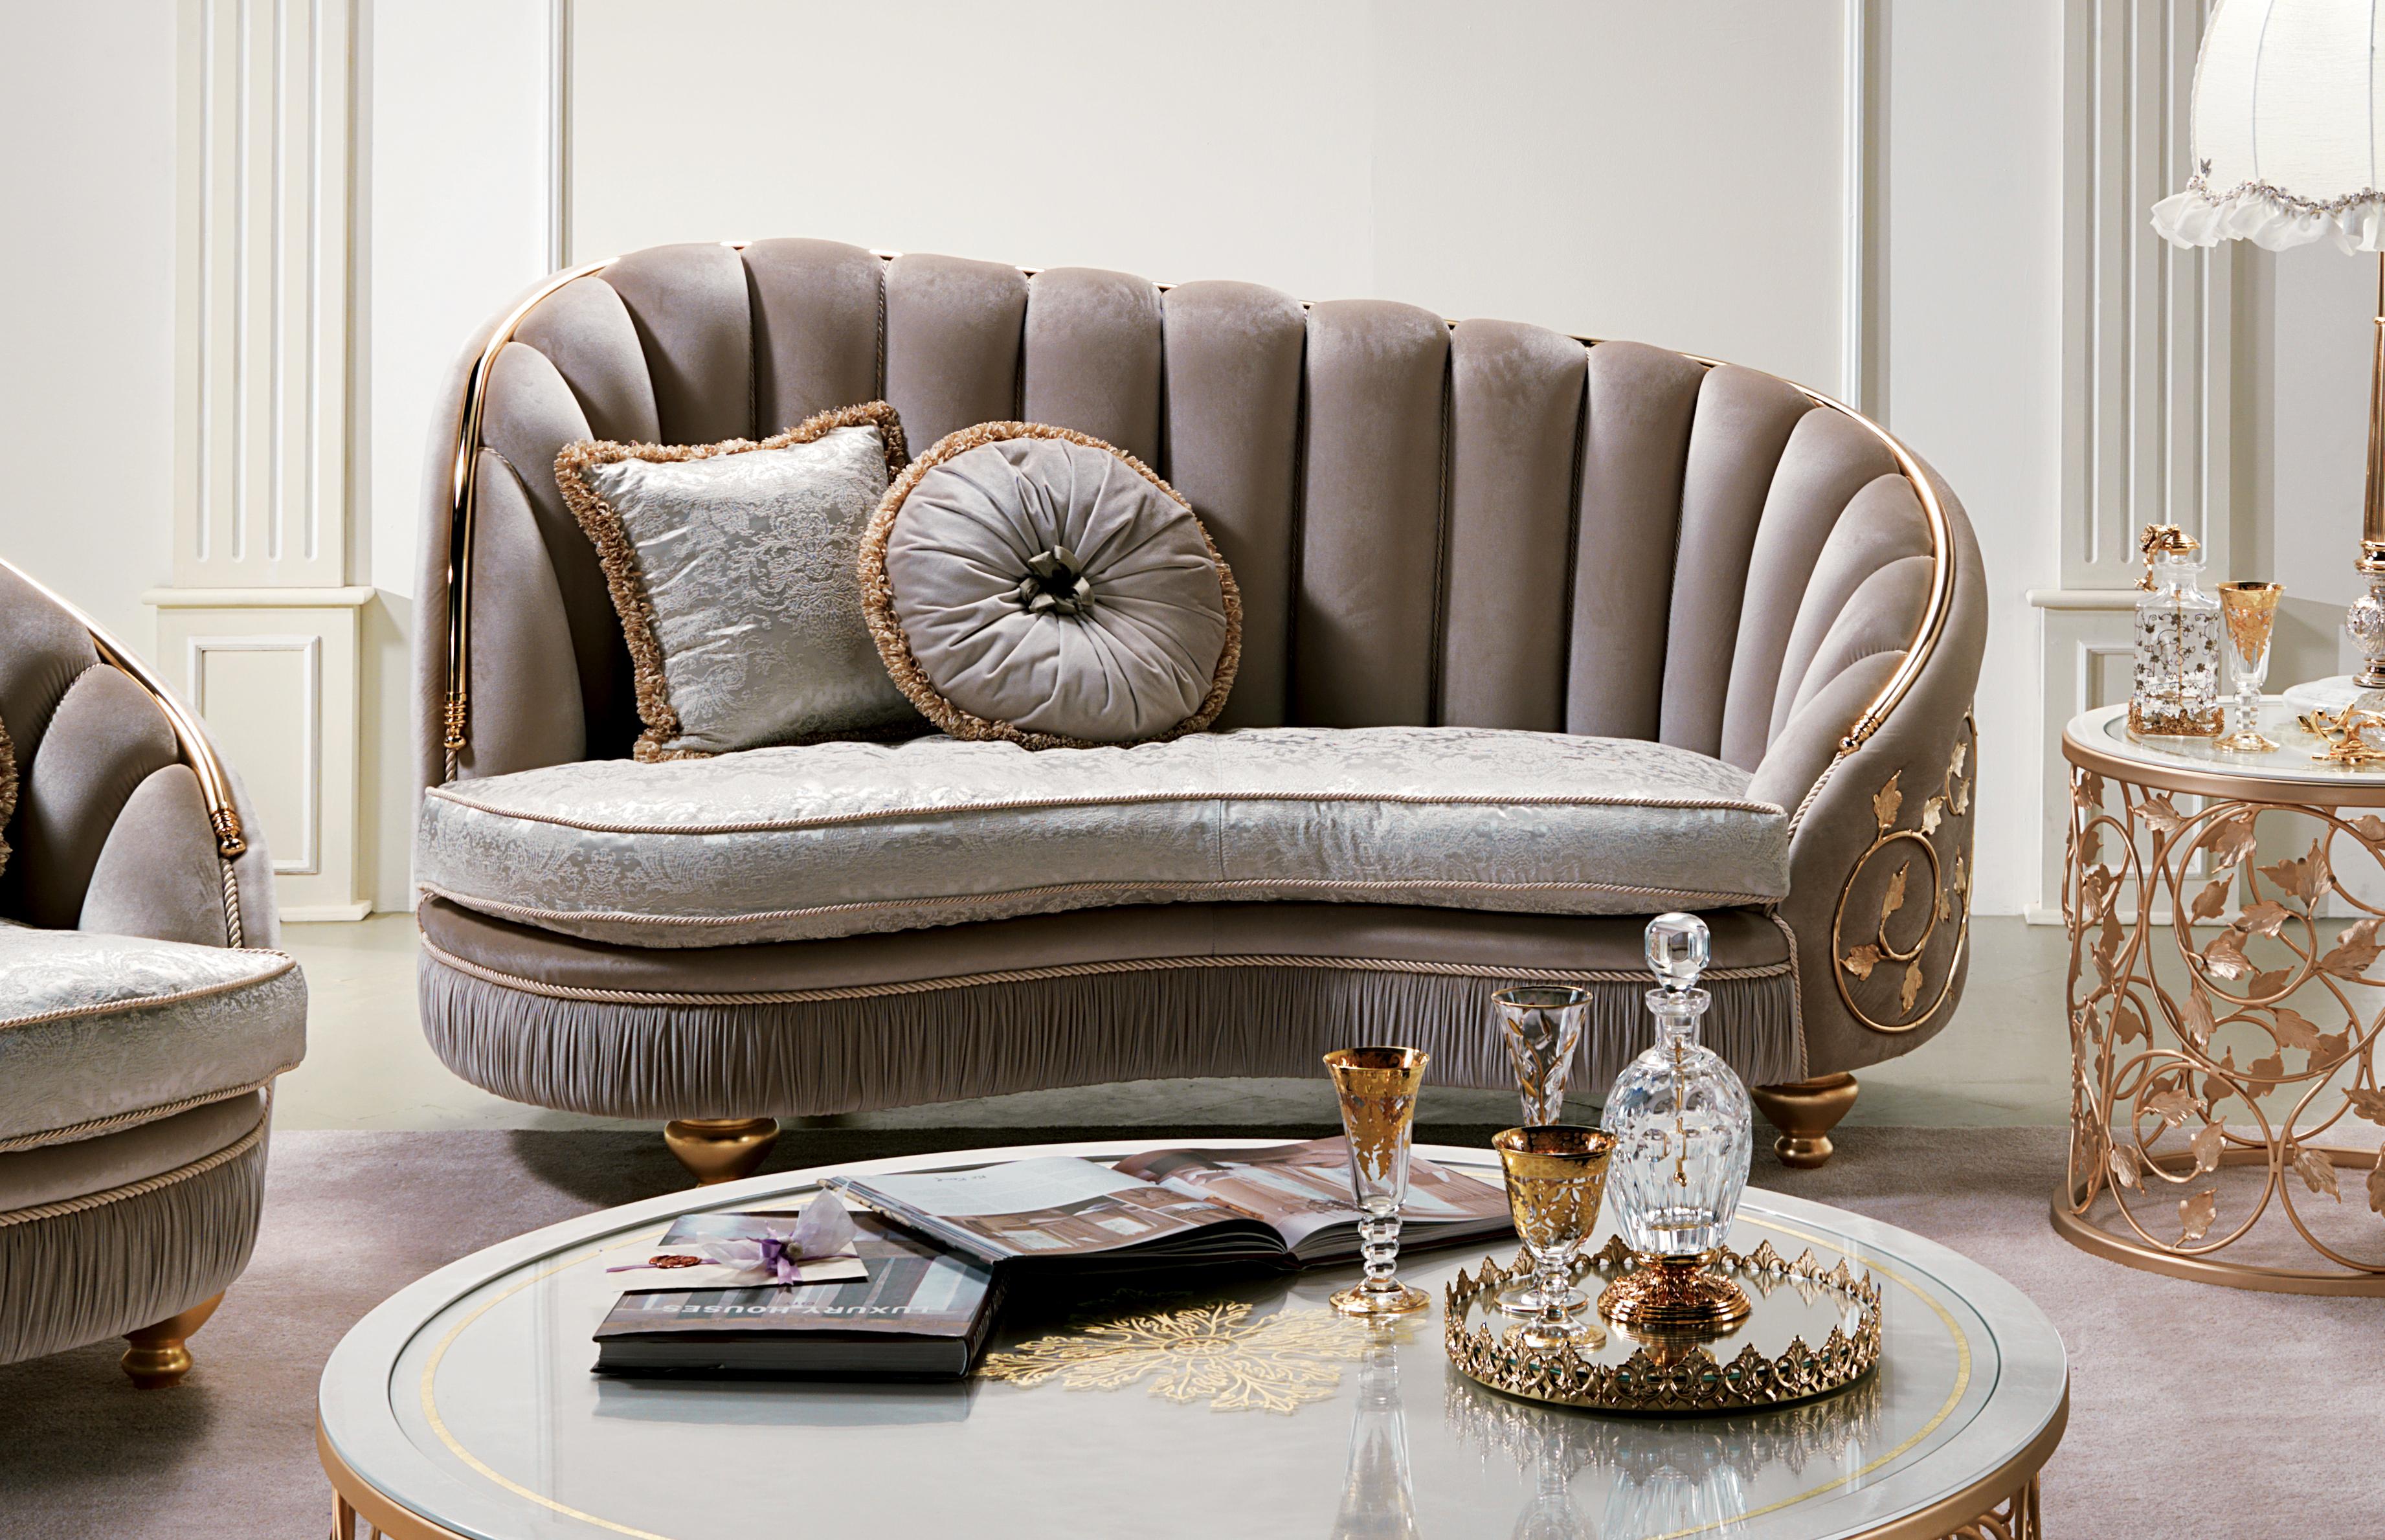 The AQ032 sofa cleverly combines fine materials and high-quality craftsmanship to create an unparalleled seating and visual experience.

The distinguishing feature of this armchair is the presence of wrought iron foliate decorations, handcrafted